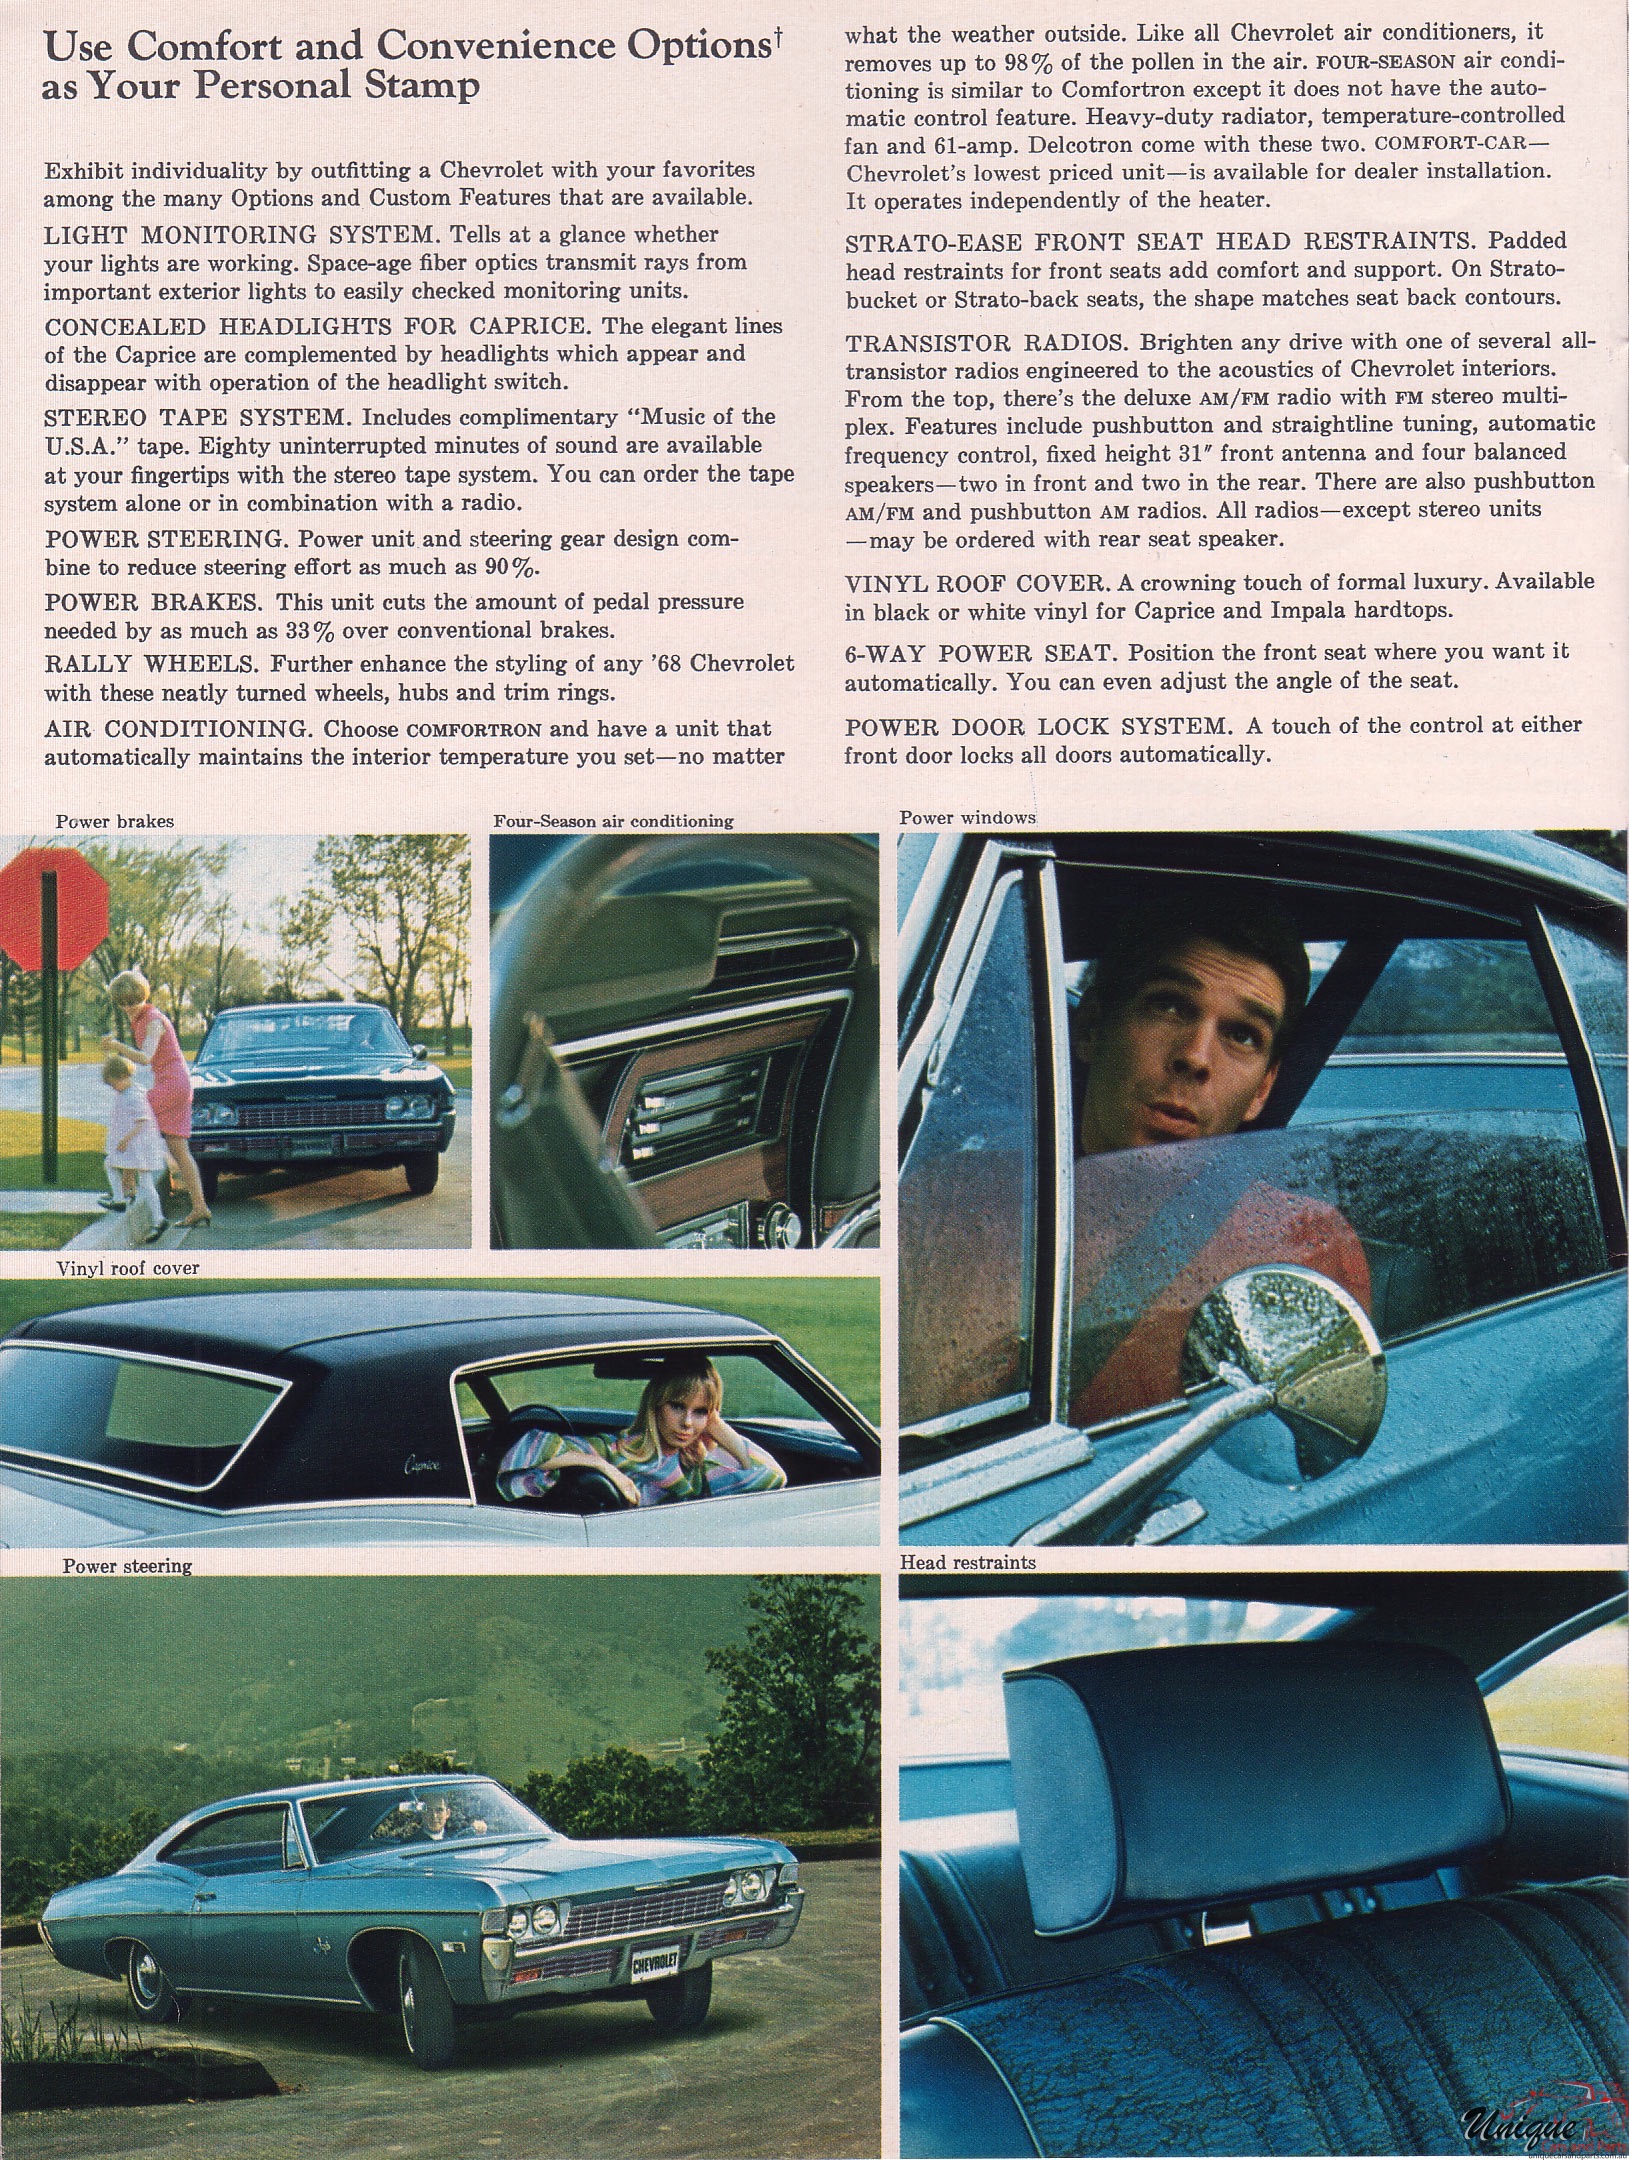 1968 Chevrolet Full-Size Brochure Page 27